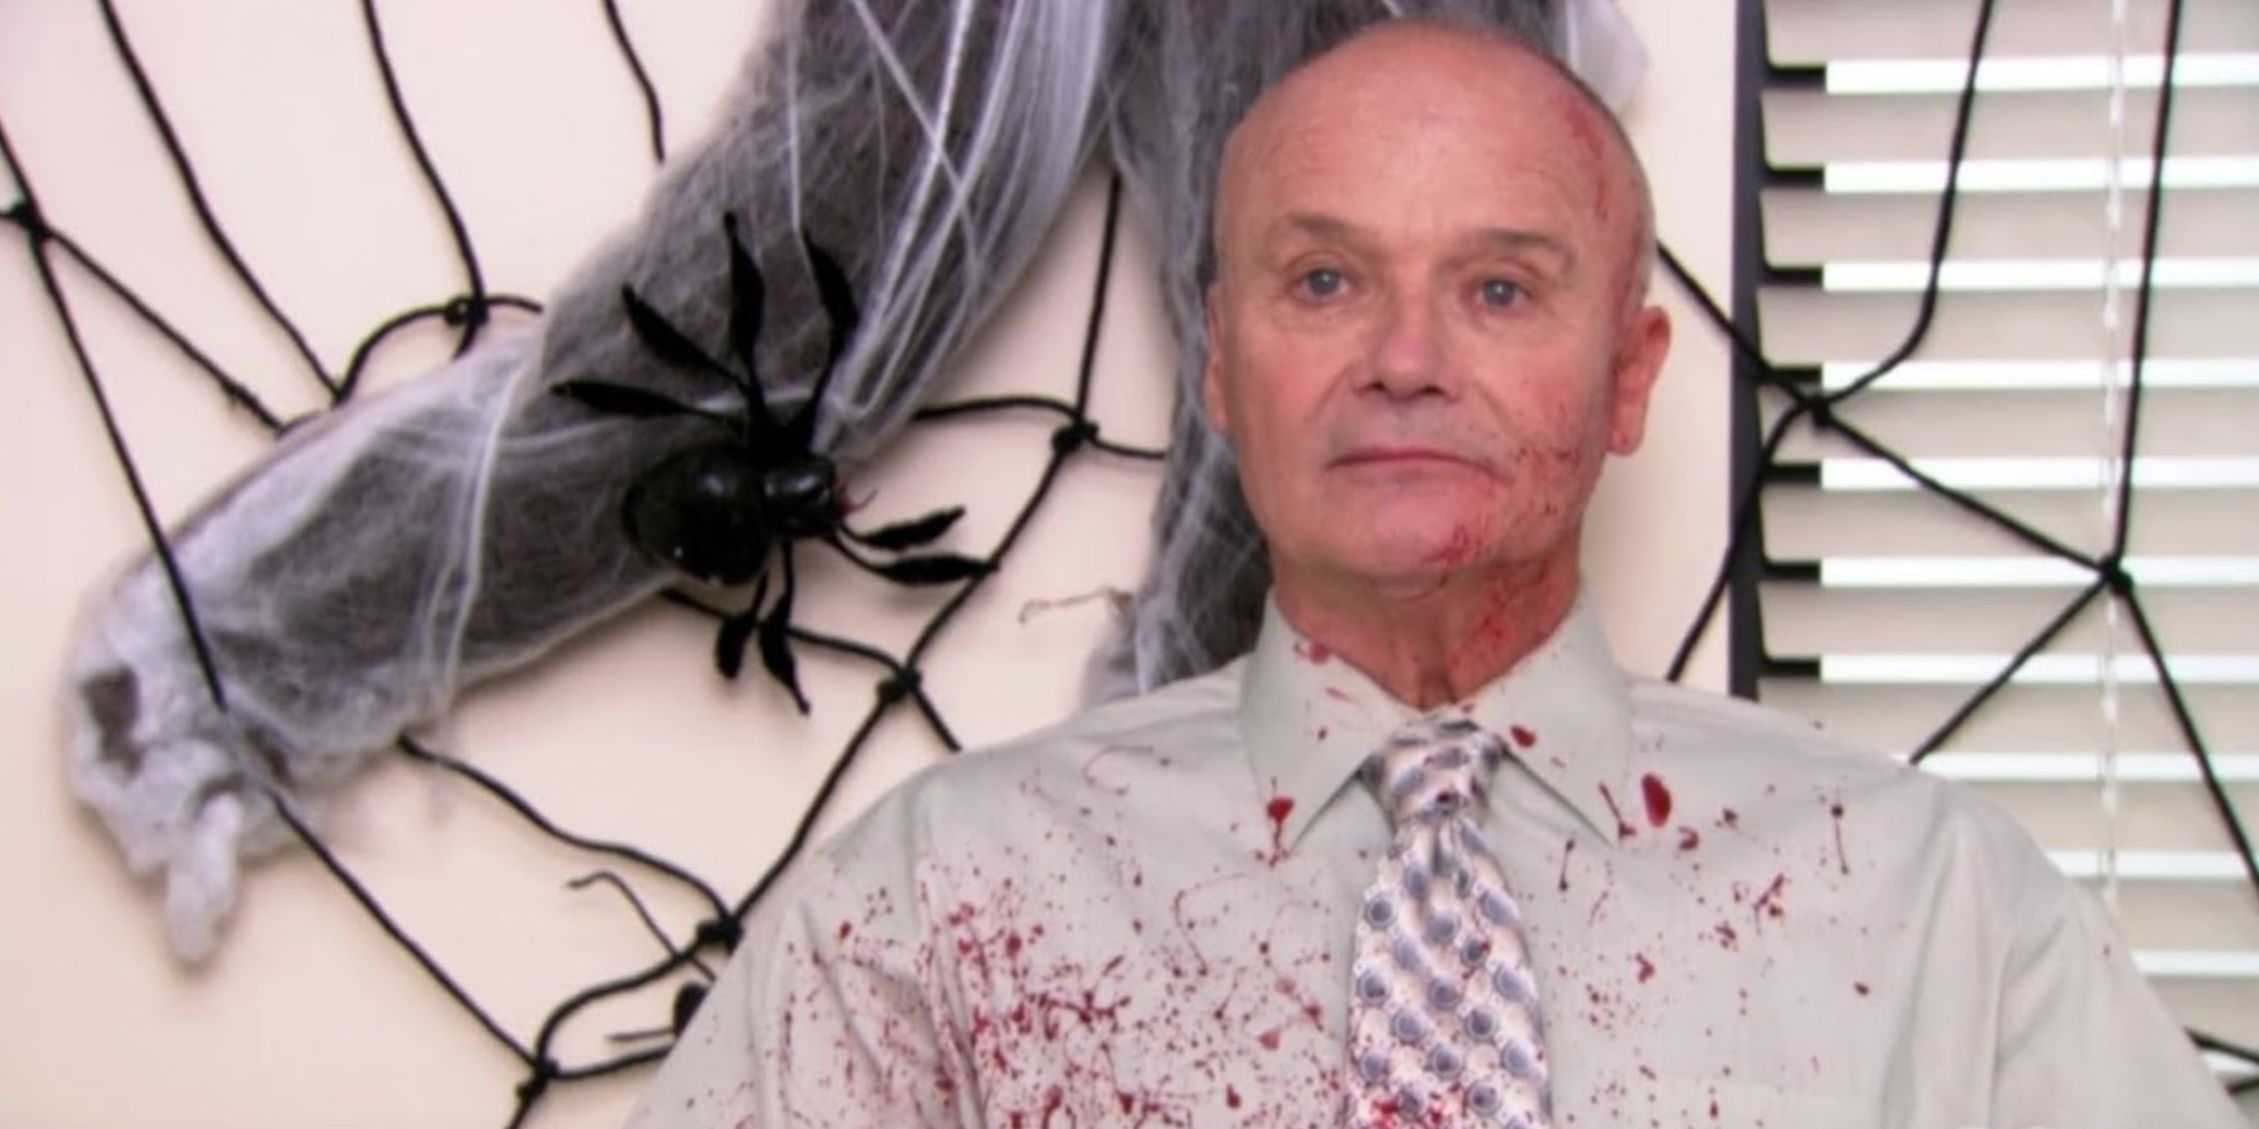 Creed Bratton with a bloody shirt in the Office